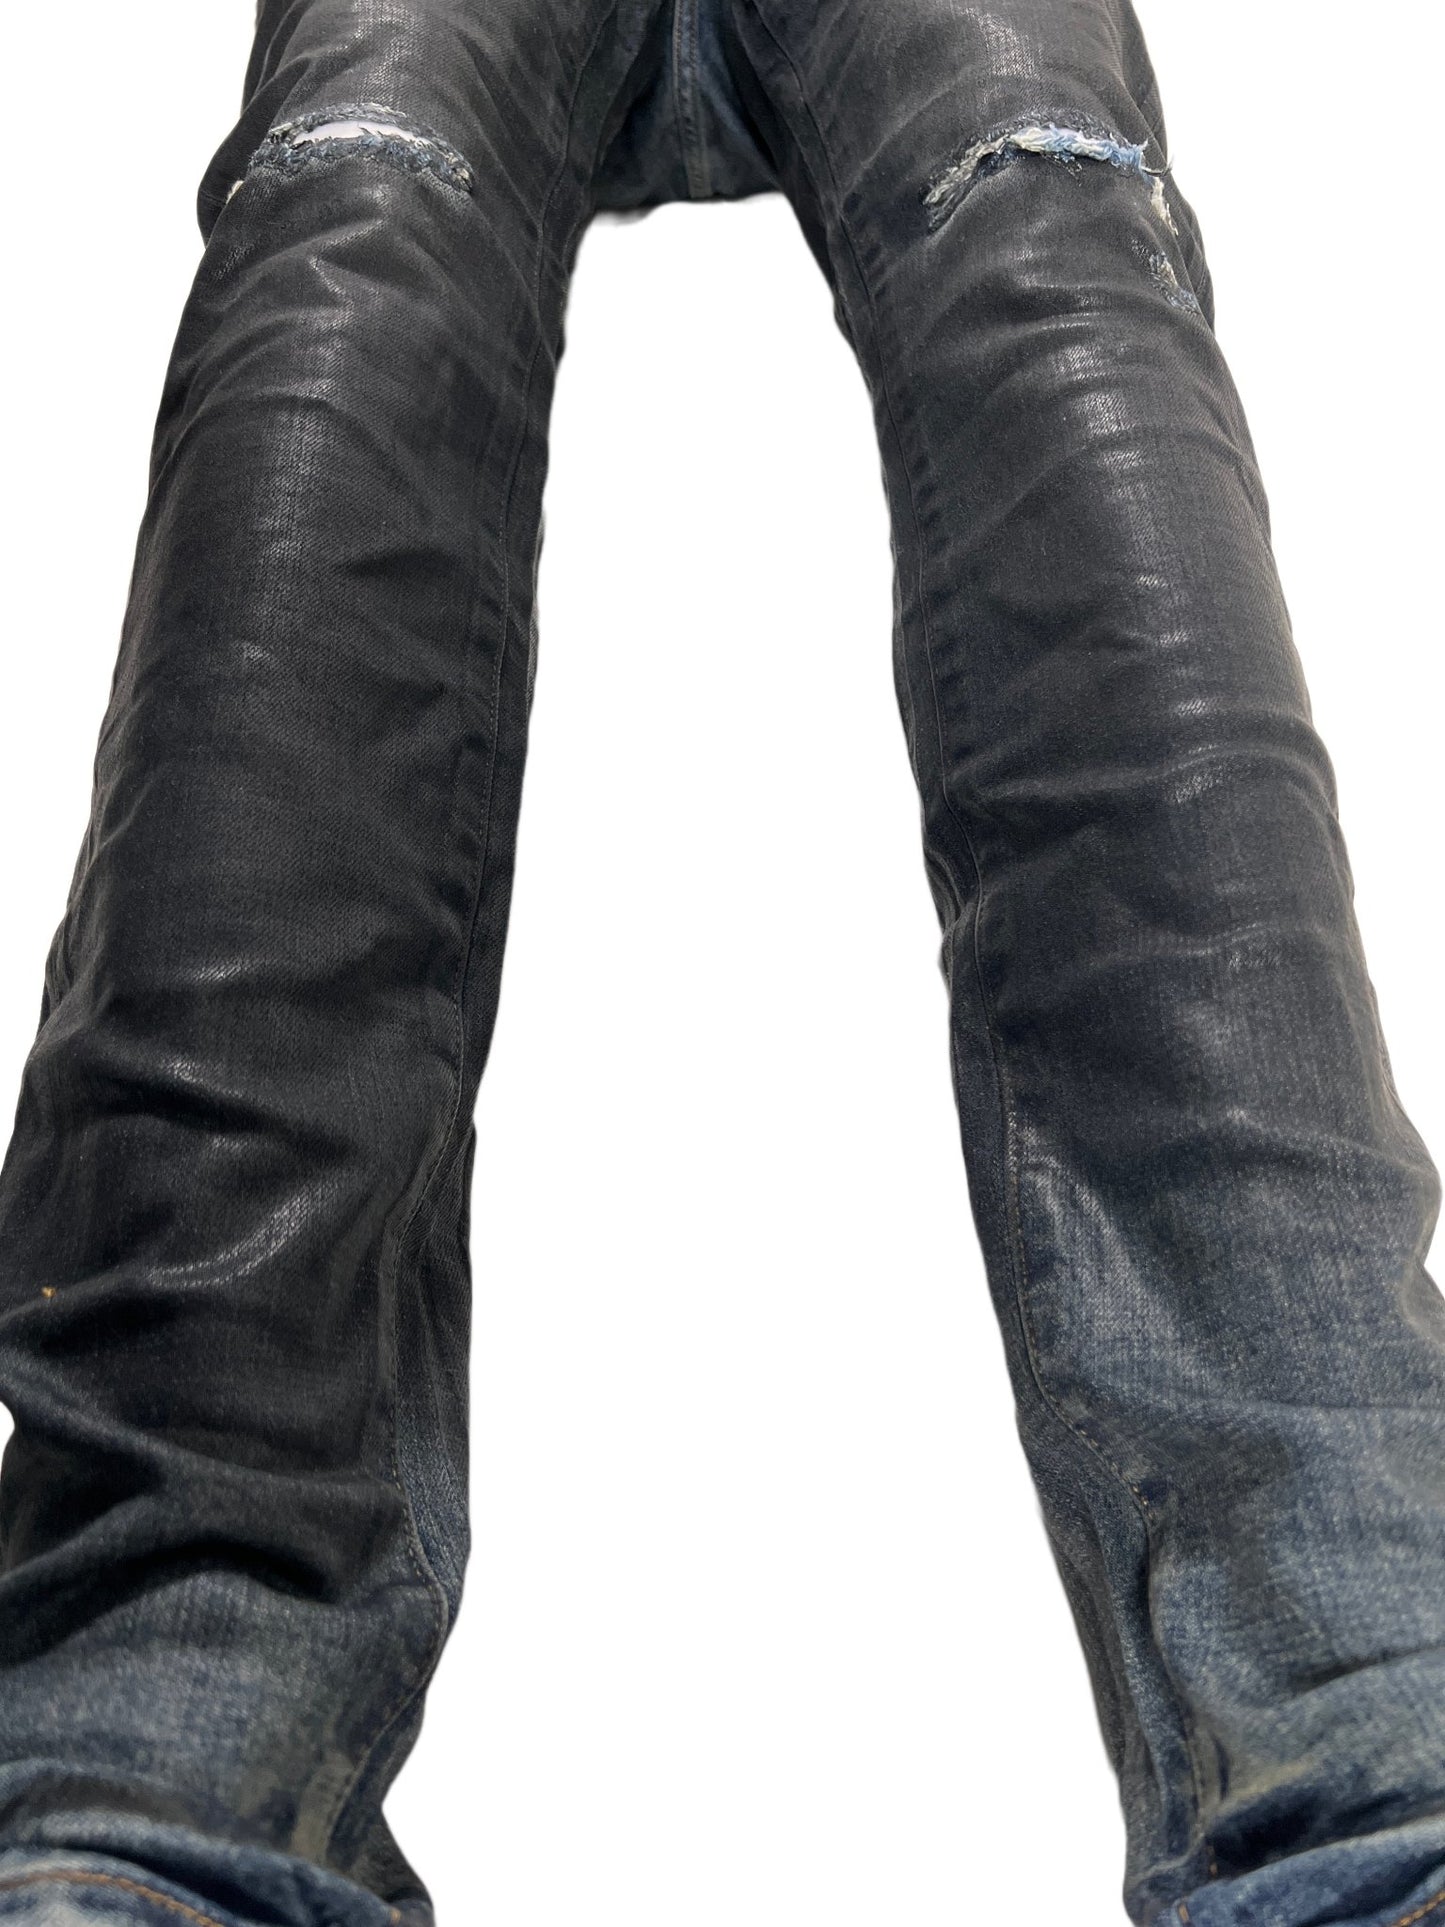 A pair of PURPLE BRAND PURPLE BRAND JEANS P001-IBCG MID INDIGO BLACK COATED GRADIENT with holes in them.